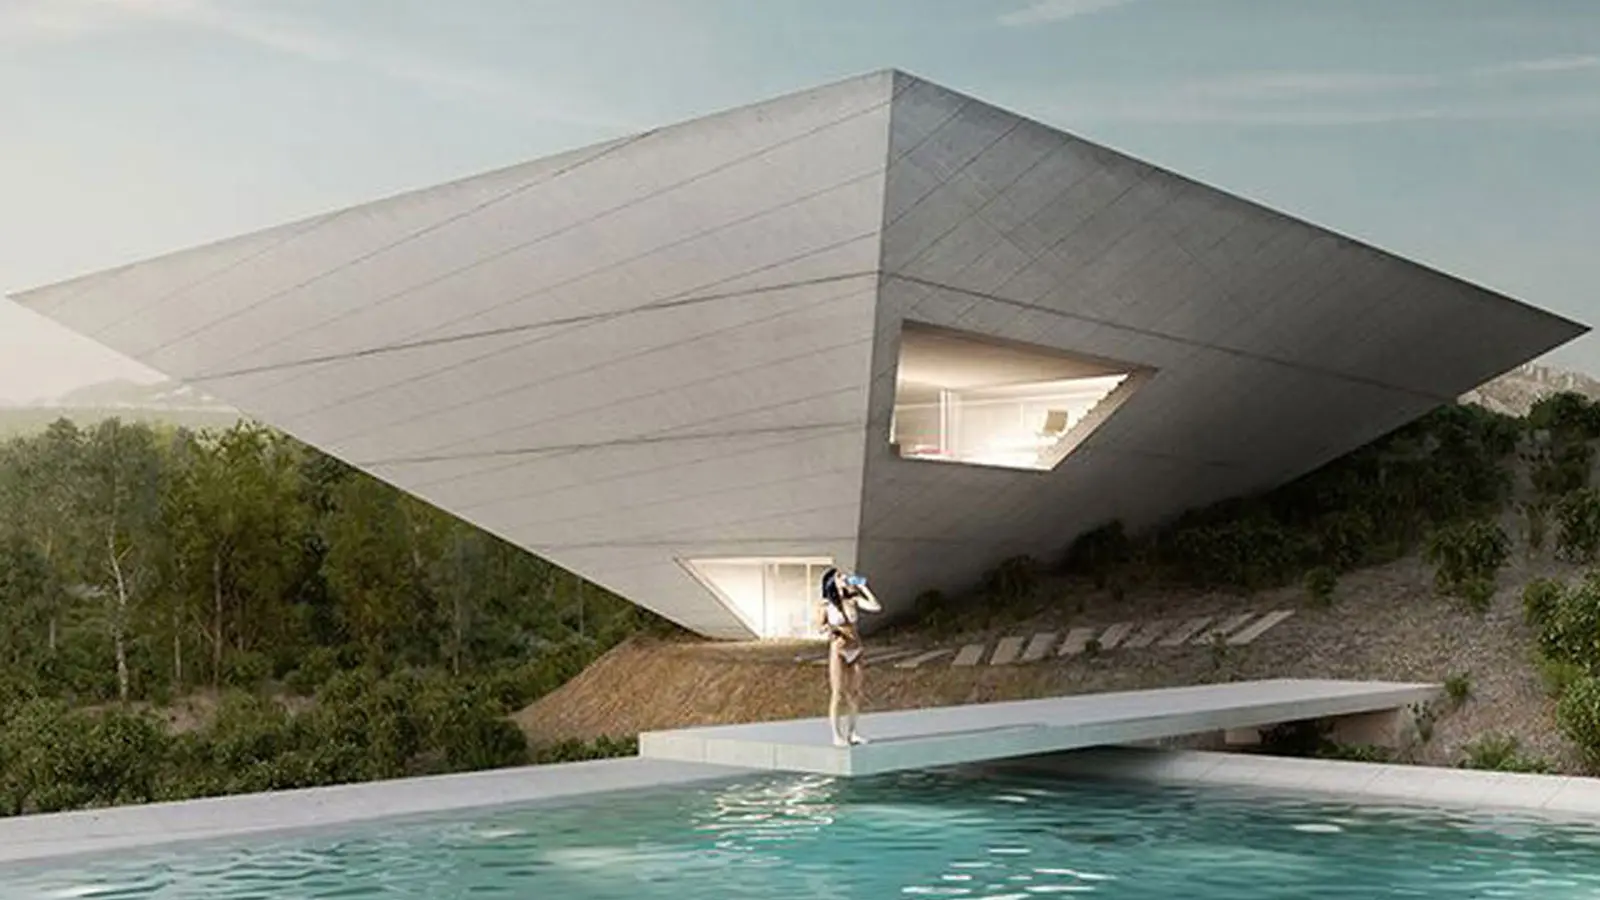 This gravity-defying home is part of French Developer Christian Bourdais’ Solo Houses series.